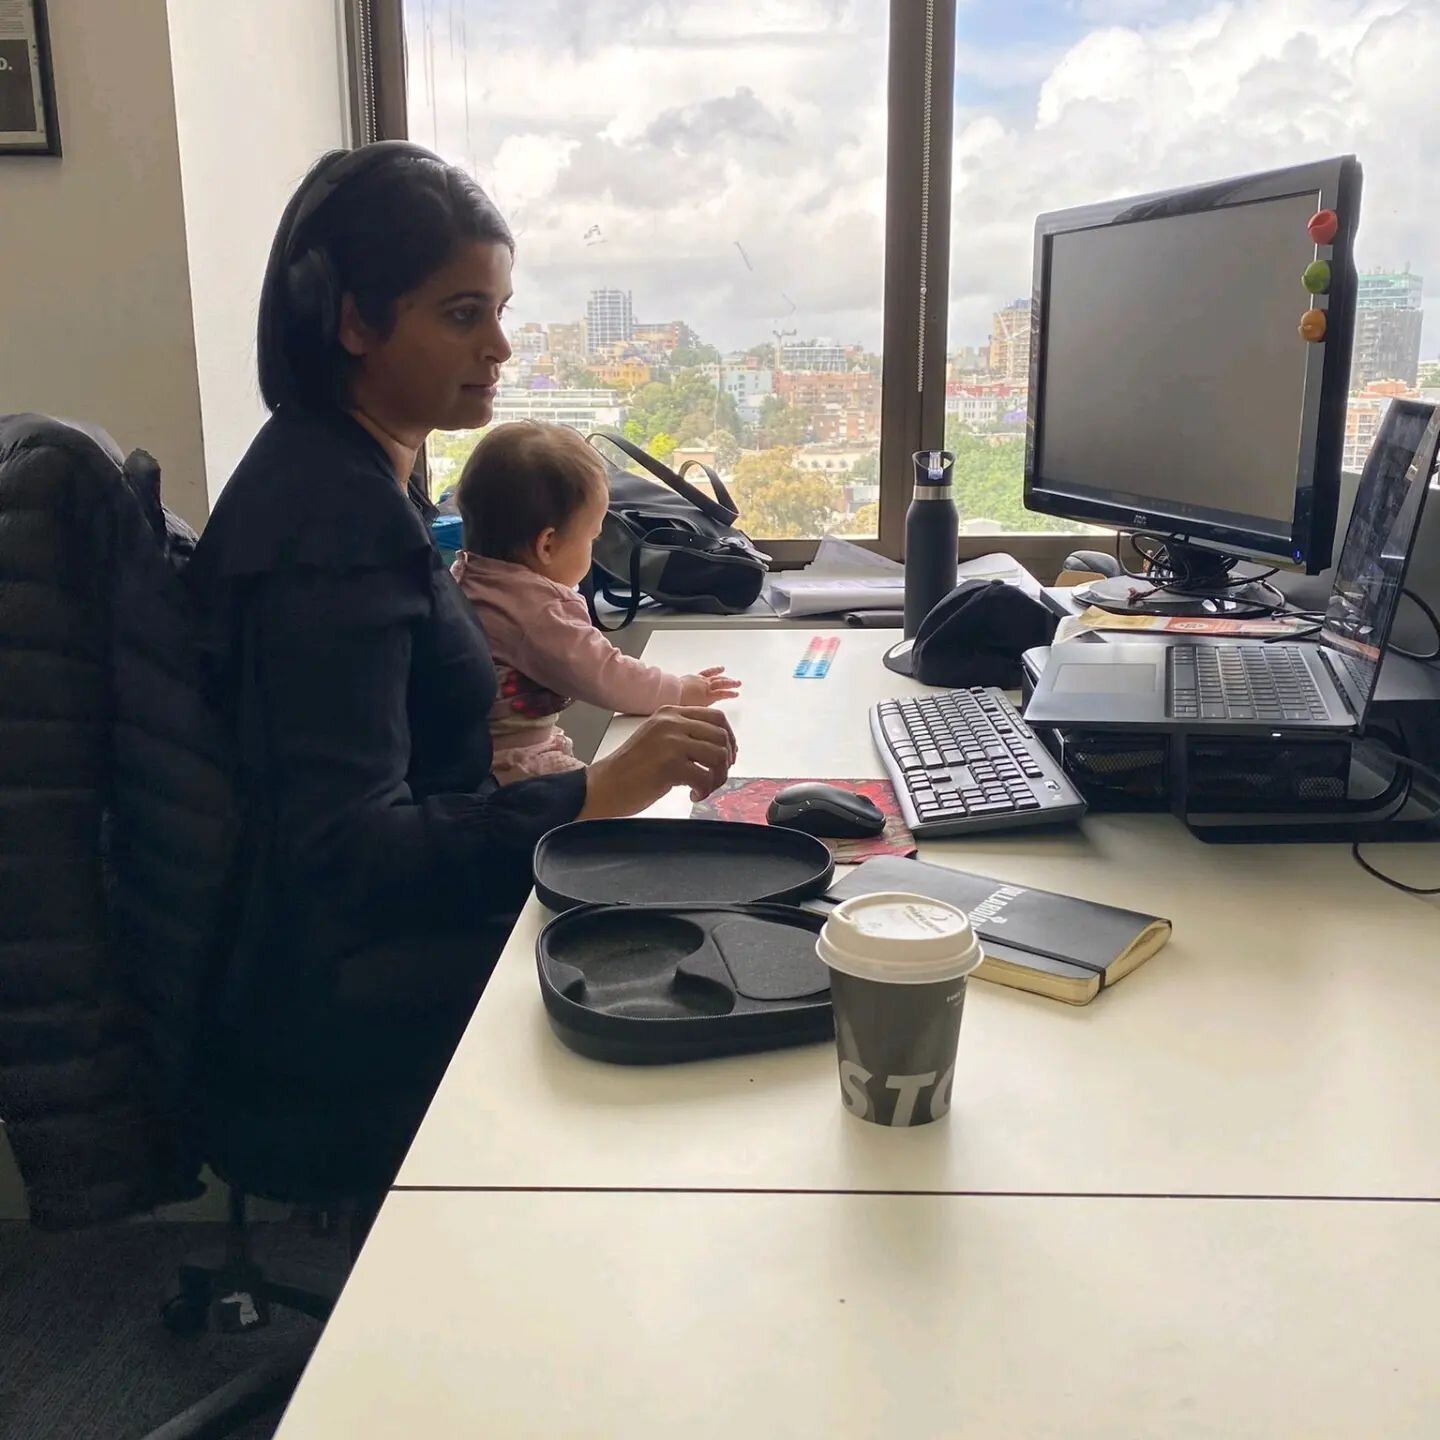 Our Co-Founder, Arani Satgunaseelan juggling client calls and her tiniest, yet most demanding 'client'. 

Who knew conference calls came with cuddles? 📞👶 #RealLifeHustle 

We are most definitely about work-life balance, but sometimes they inter-min